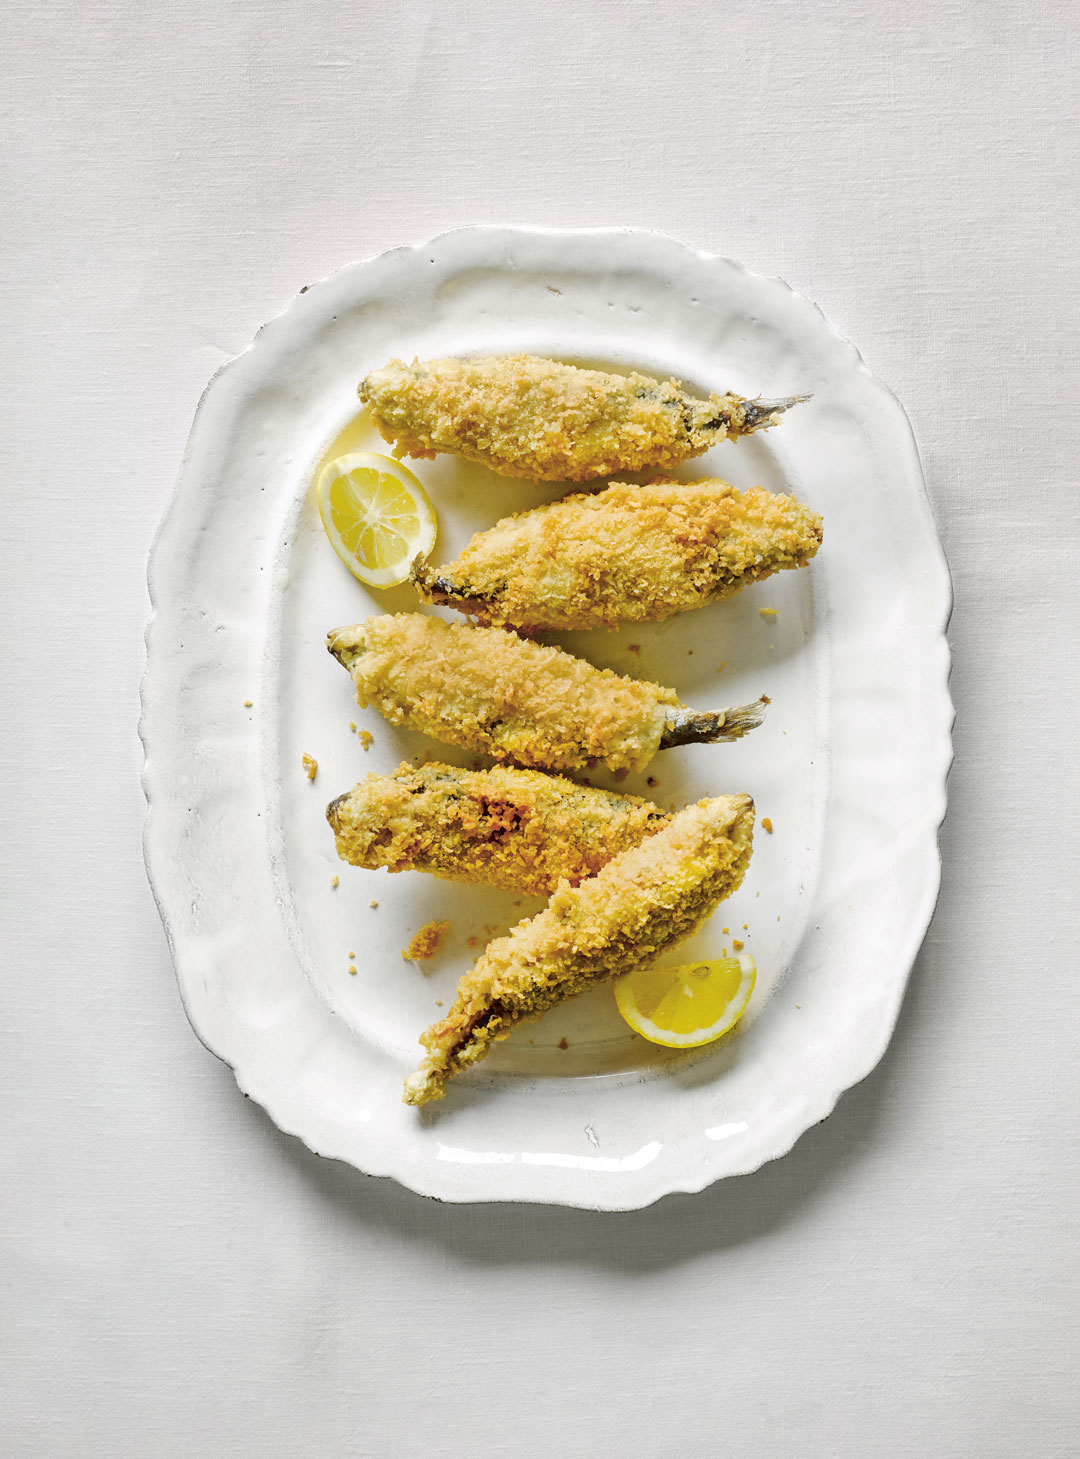 Sardines in breadcrumbs, from The Silver Spoon Classic